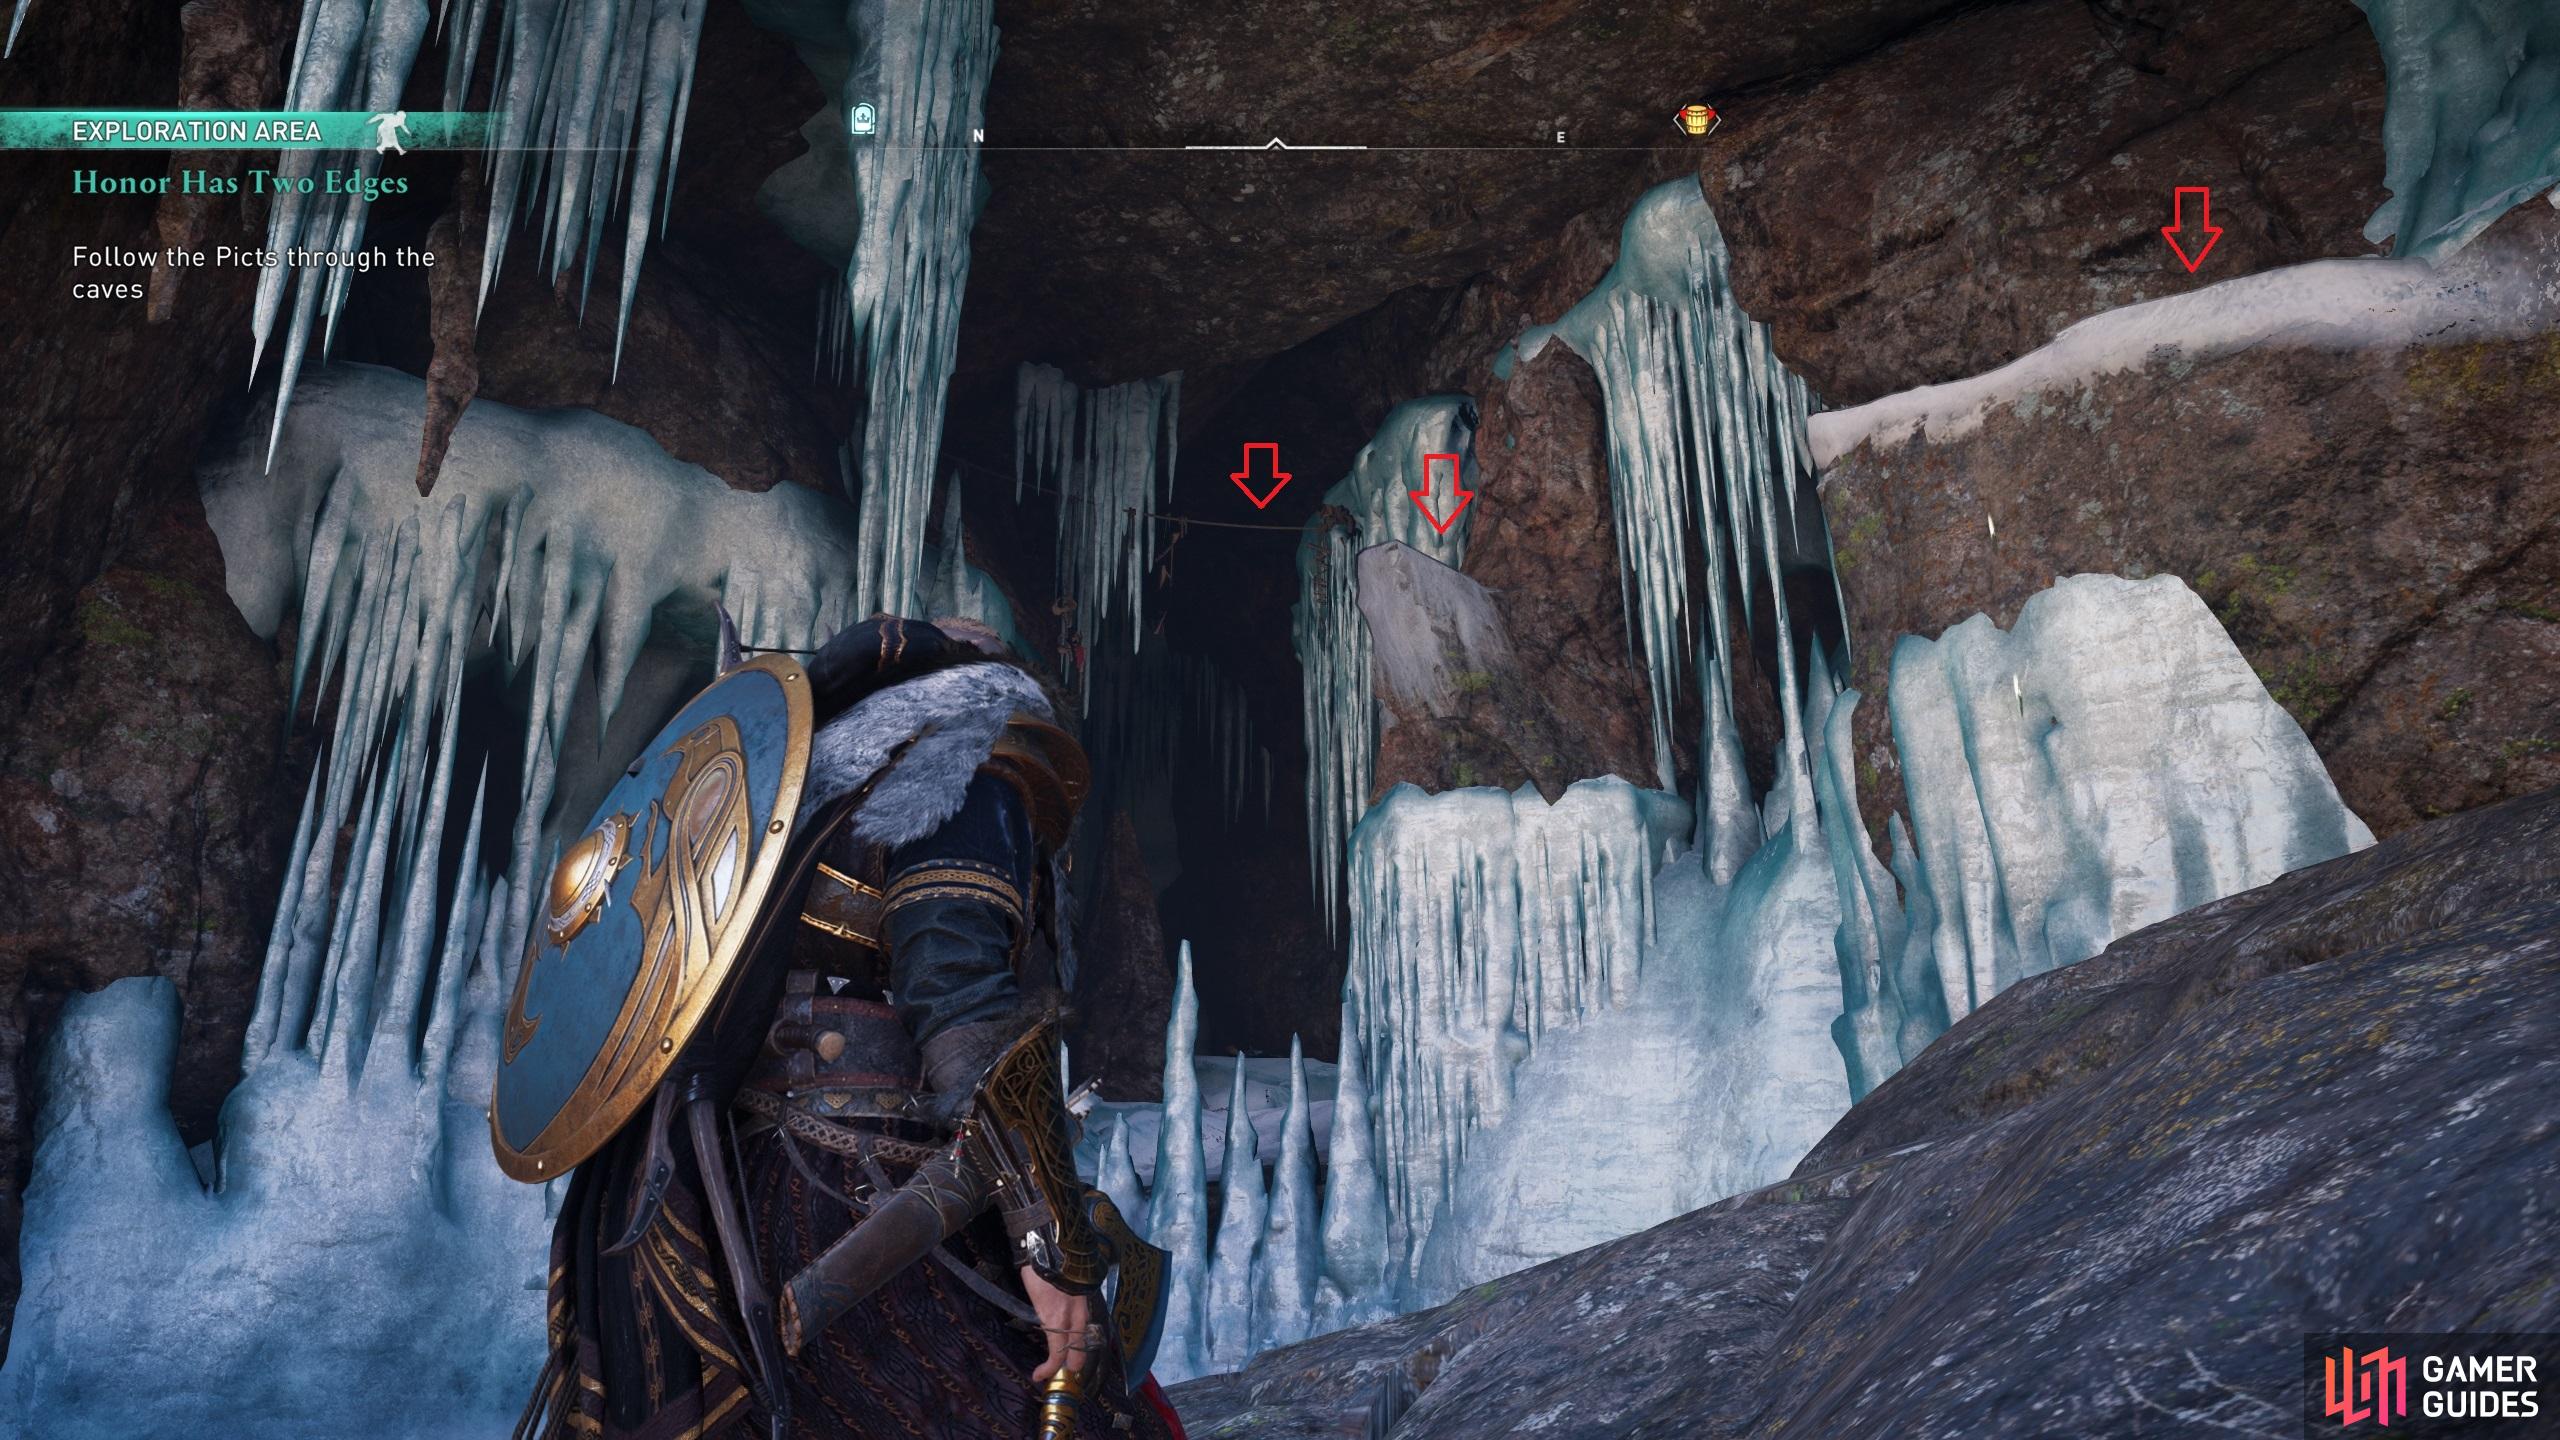 You'll need to use the edge of the wall surface to enter the cave through the ice.